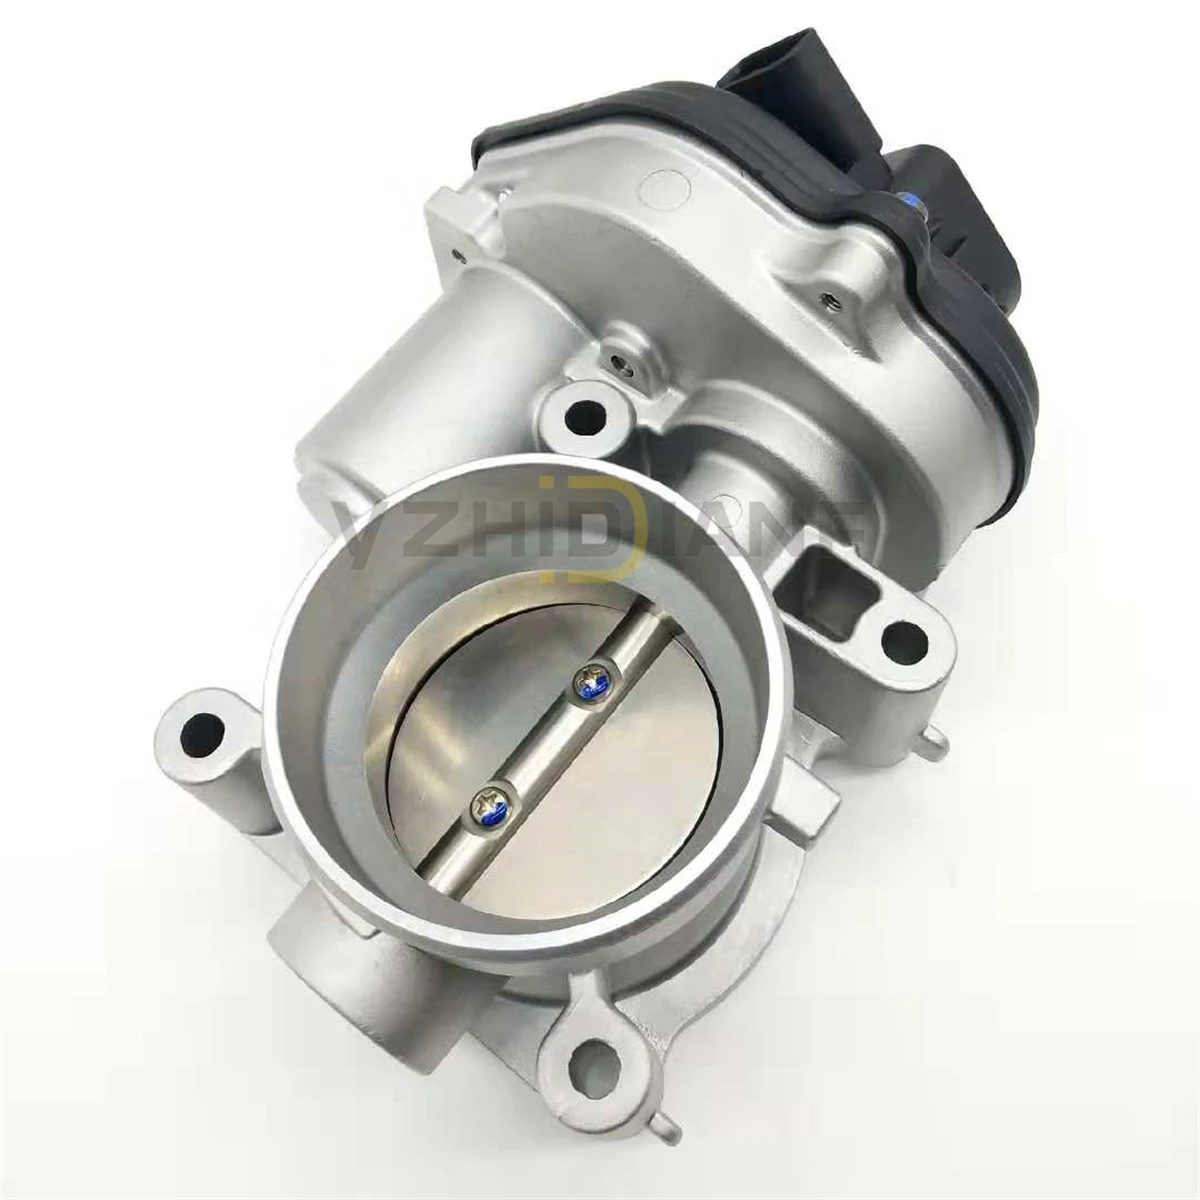 

1x Electronic Throttle Body Assembly 1556736 VP4M5U9E927DC 4M5GFA 2.3L case for FORD- Mondeo- WLR6701 2.3L 2.5L 2009-2012